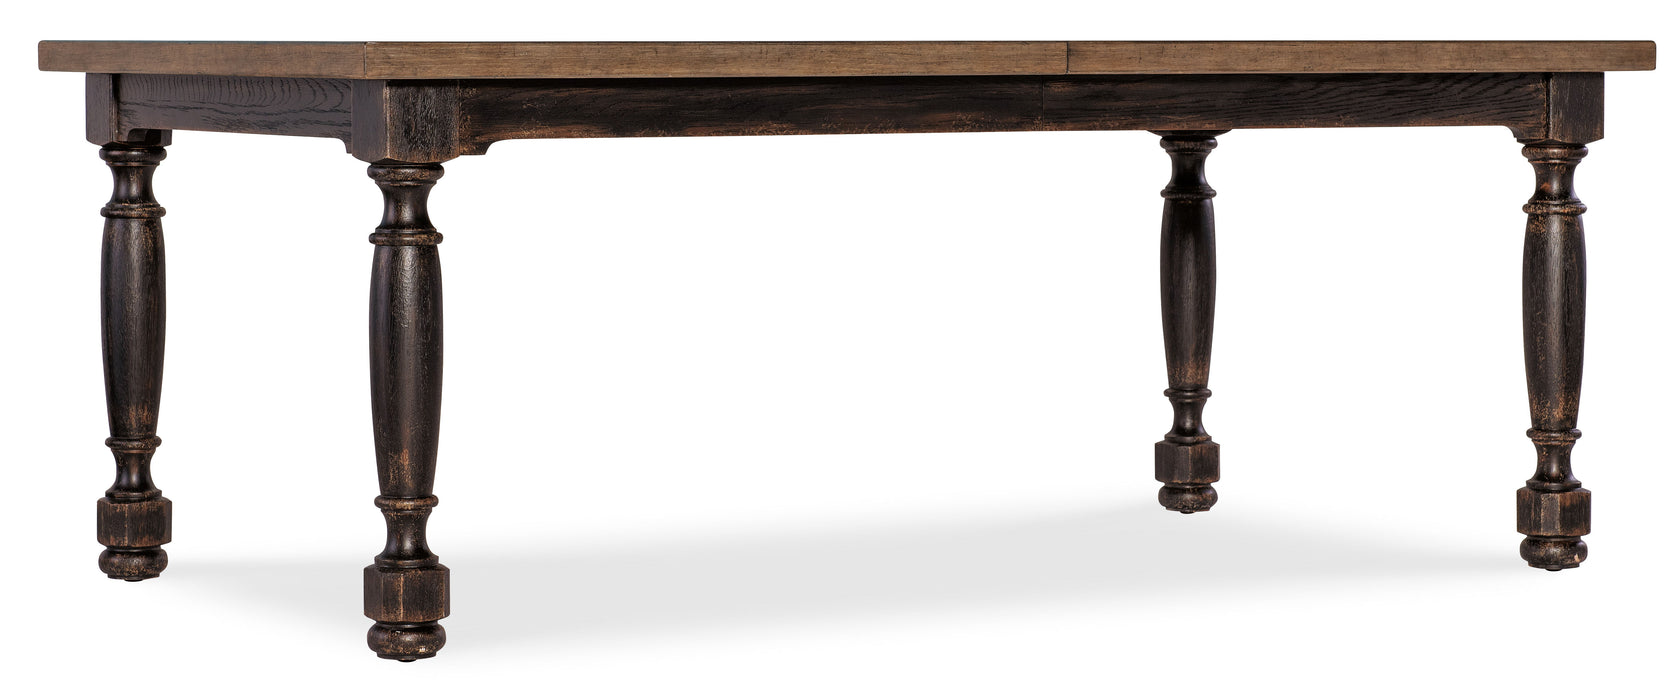 Americana - Leg Dining Table With One 22" Leaf - Dark Brown